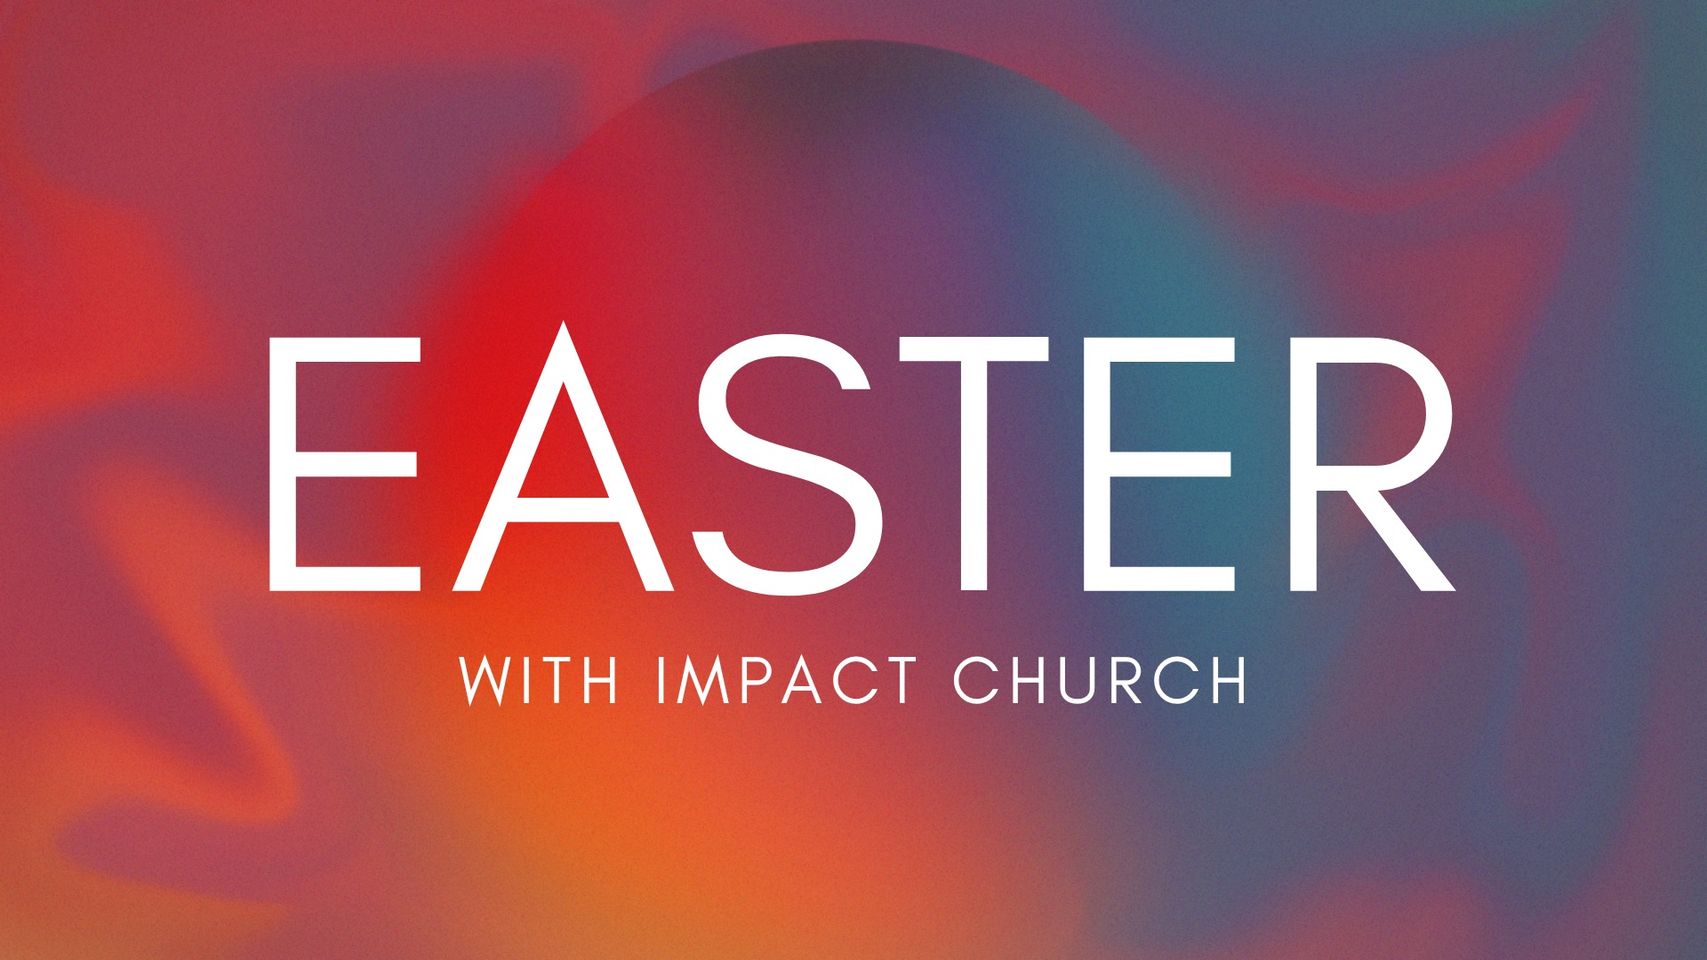 <h1 class="tribe-events-single-event-title">Easter at Impact Church</h1>